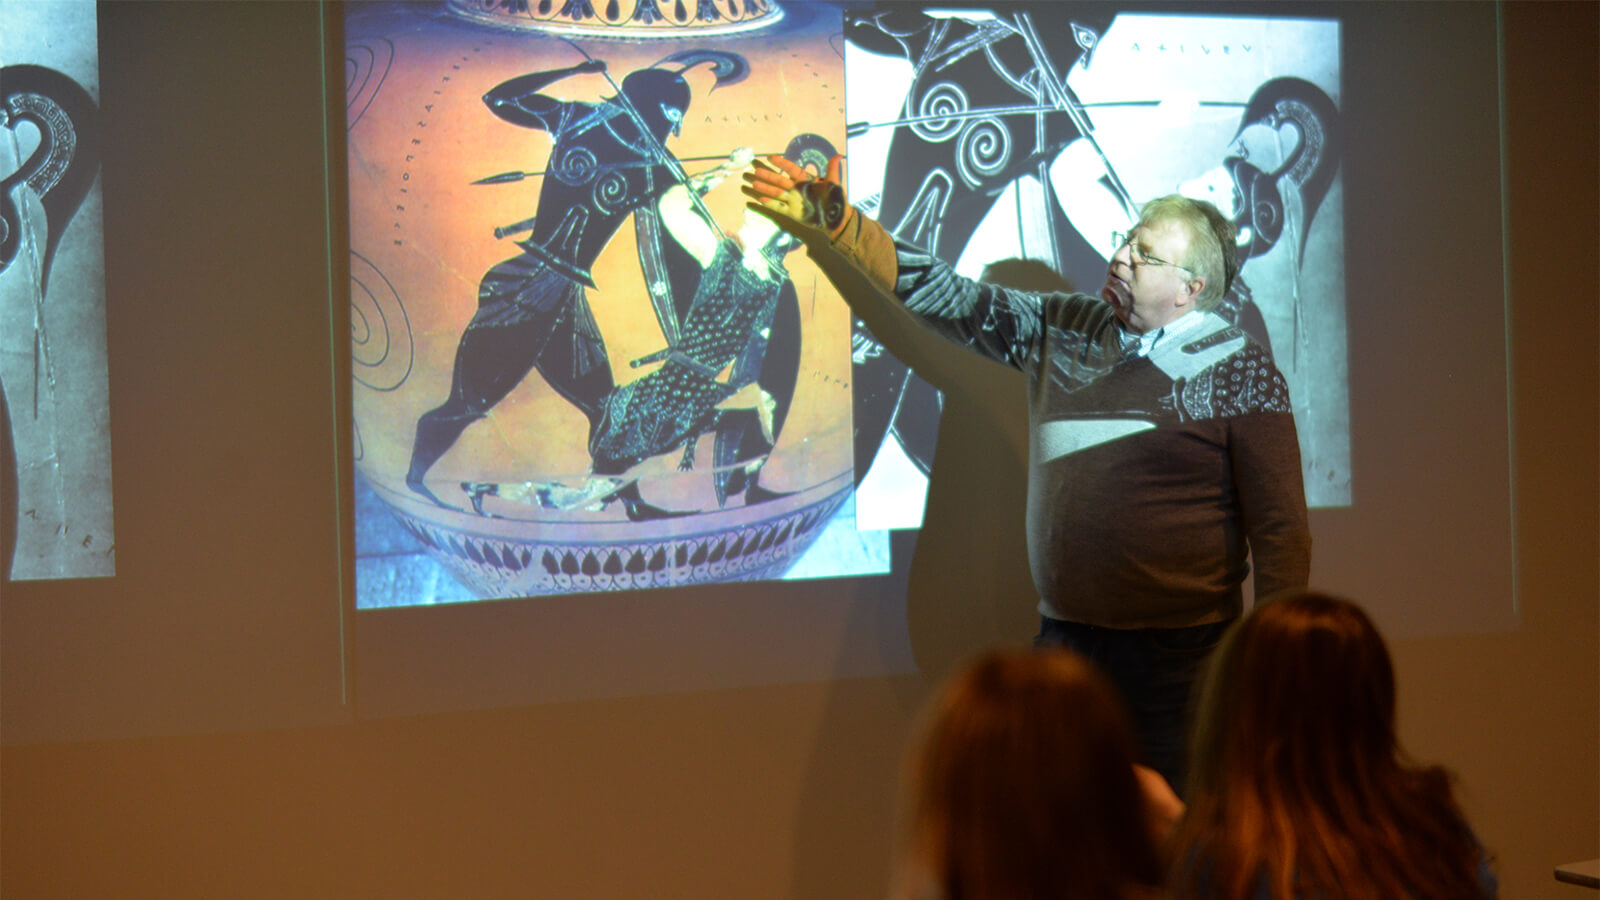 Faculty member pointing to artwork on projection screen